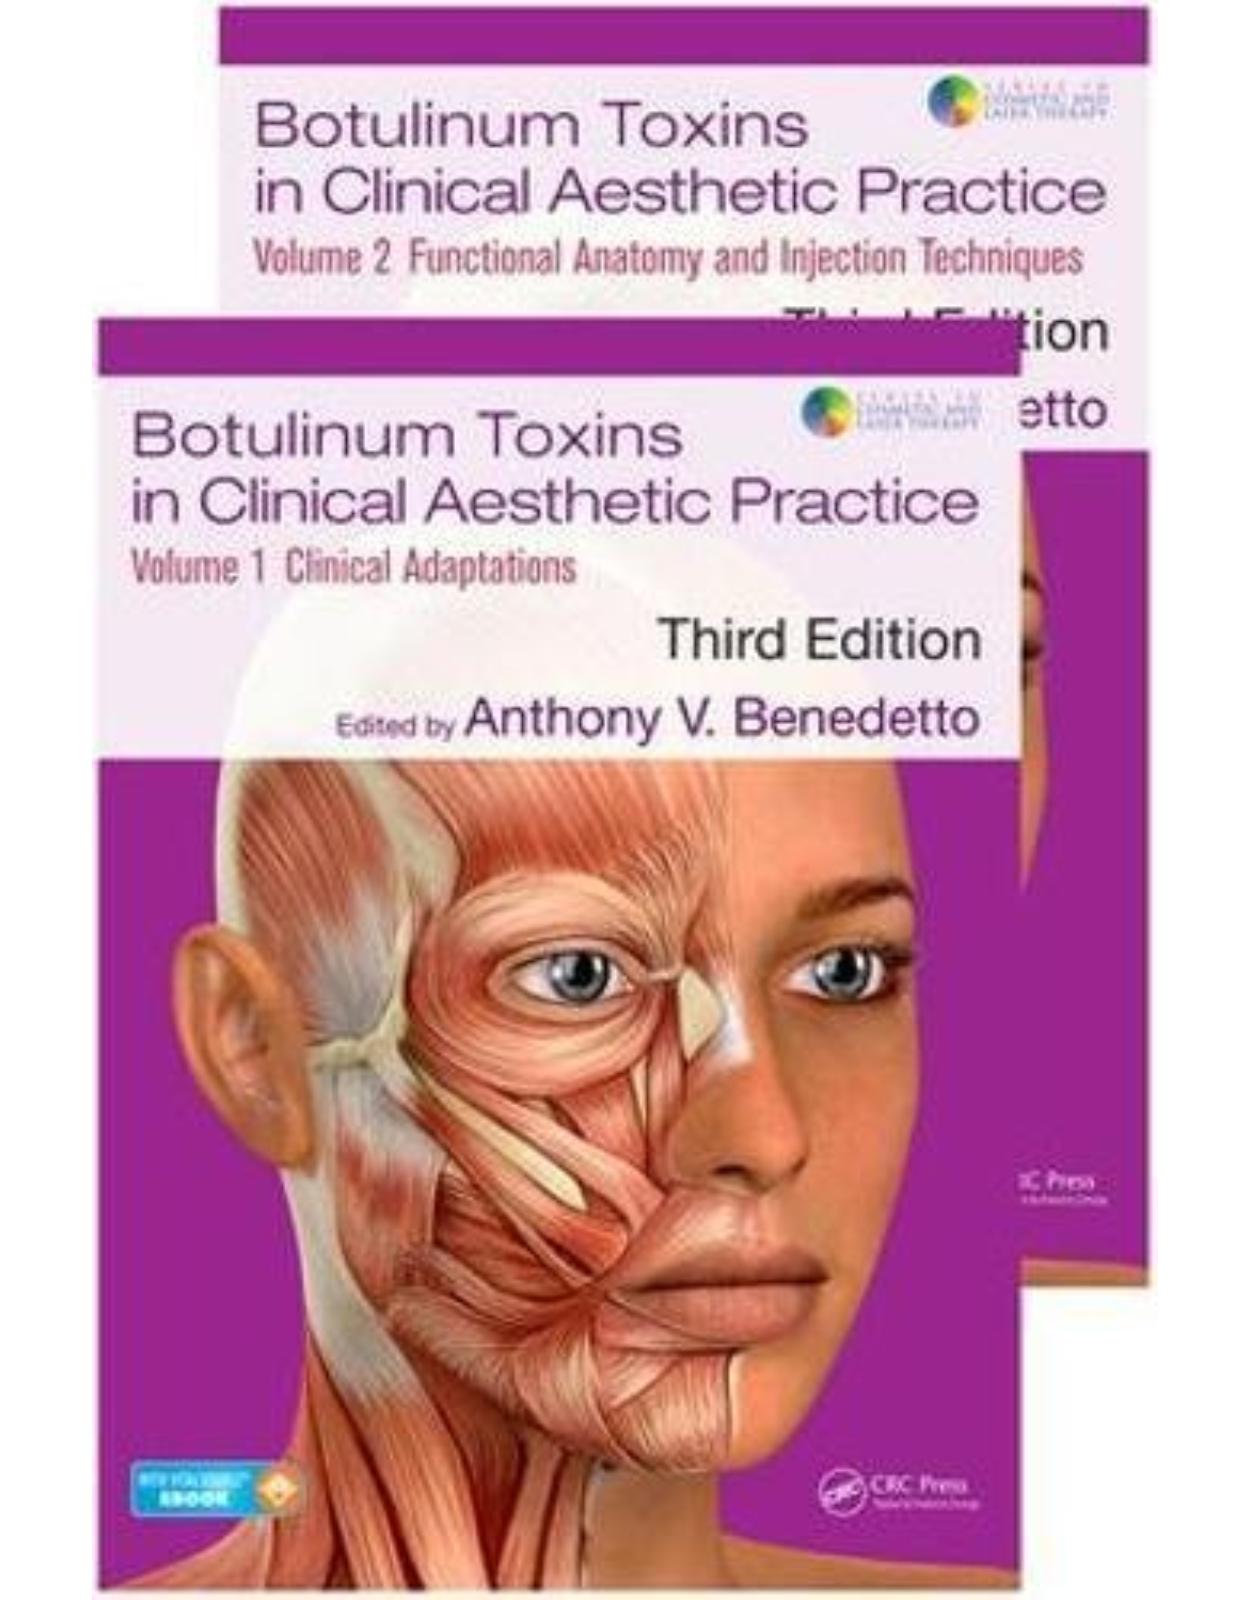 Botulinum Toxins in Clinical Aesthetic Practice 3E: Two Volume Set